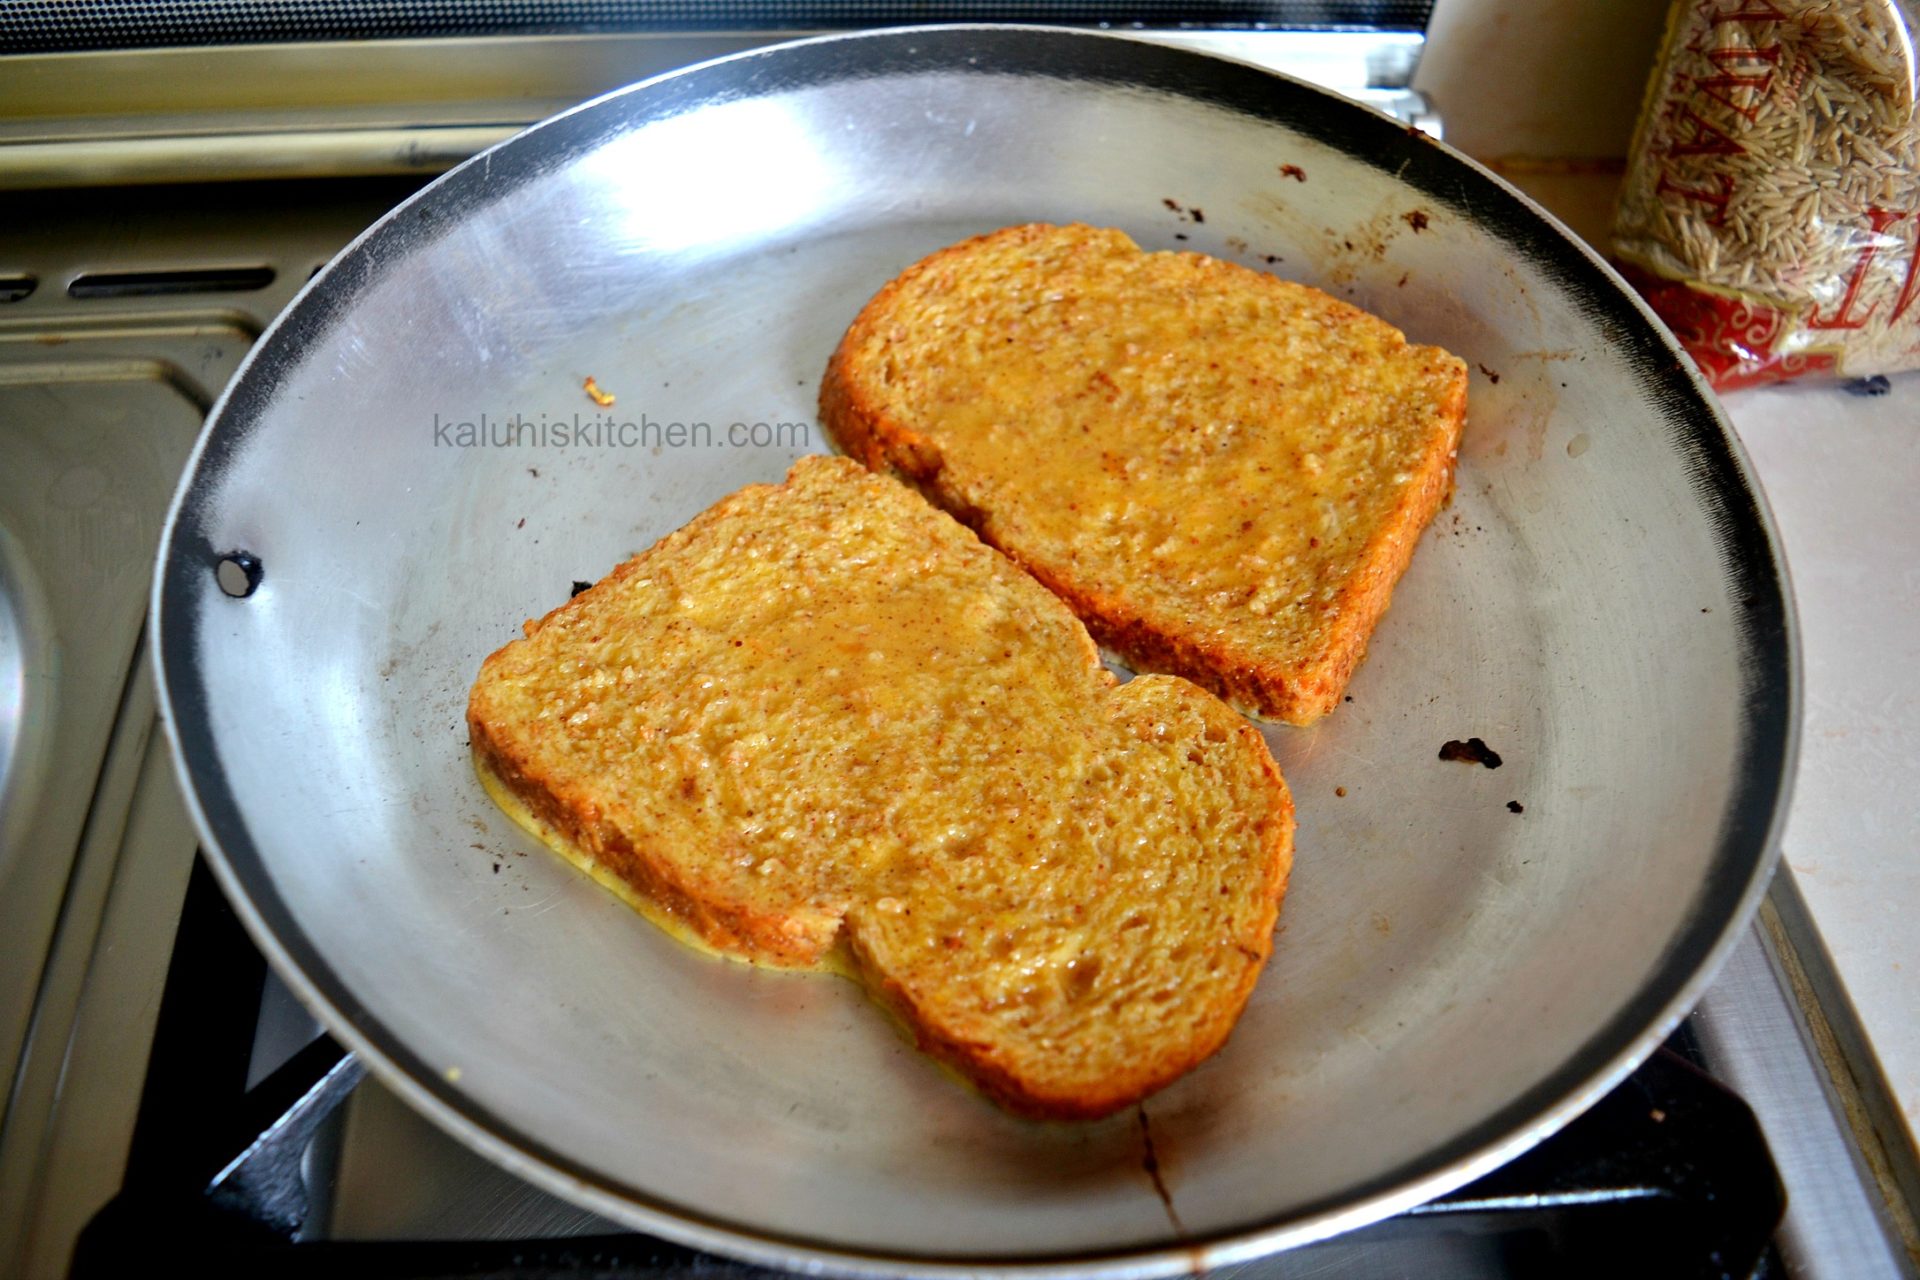 soaking the bread for a short while ensures the bread does not get too soggy_pumpkin and cardamom french toast_kaluhiskitchen.com